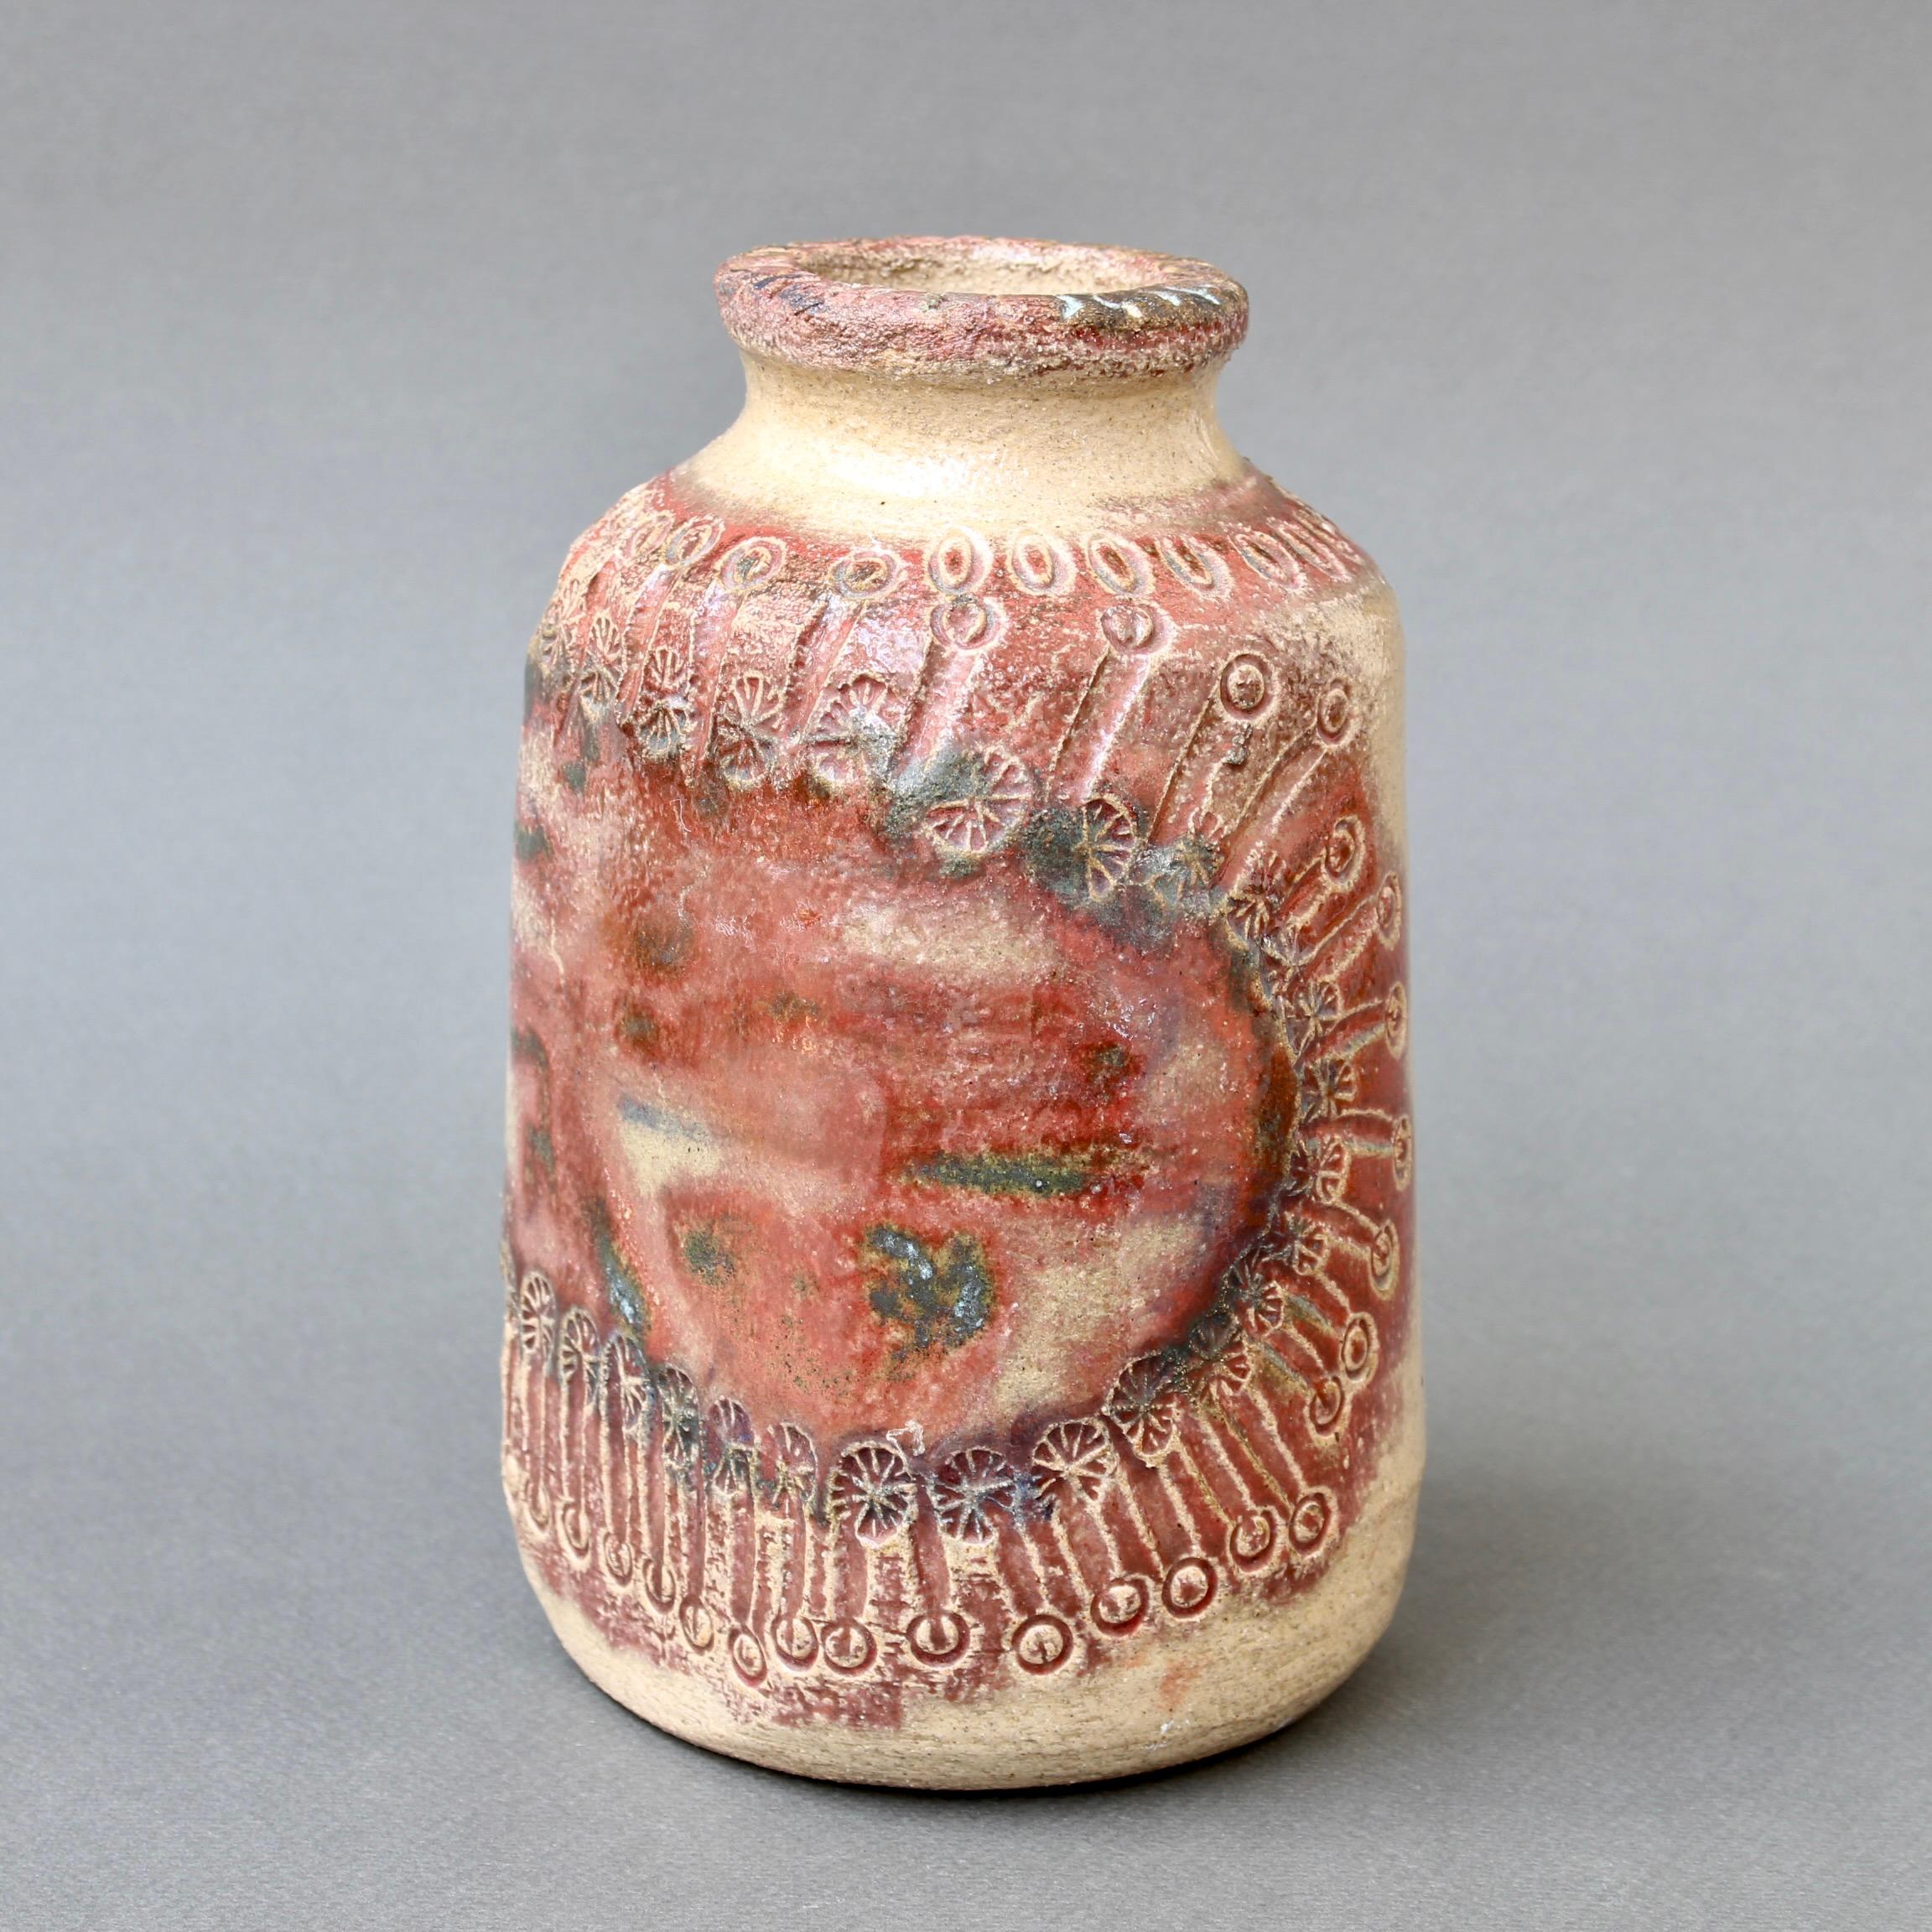 Mid-century ceramic vase (circa 1970s) by Marcel Giraud, Vallauris, France. A rustic, charming piece with a mostly red frieze in abstract surrounded by stylised sun flowers incised into the enamel. On the opposite side the viewer finds curvy lines